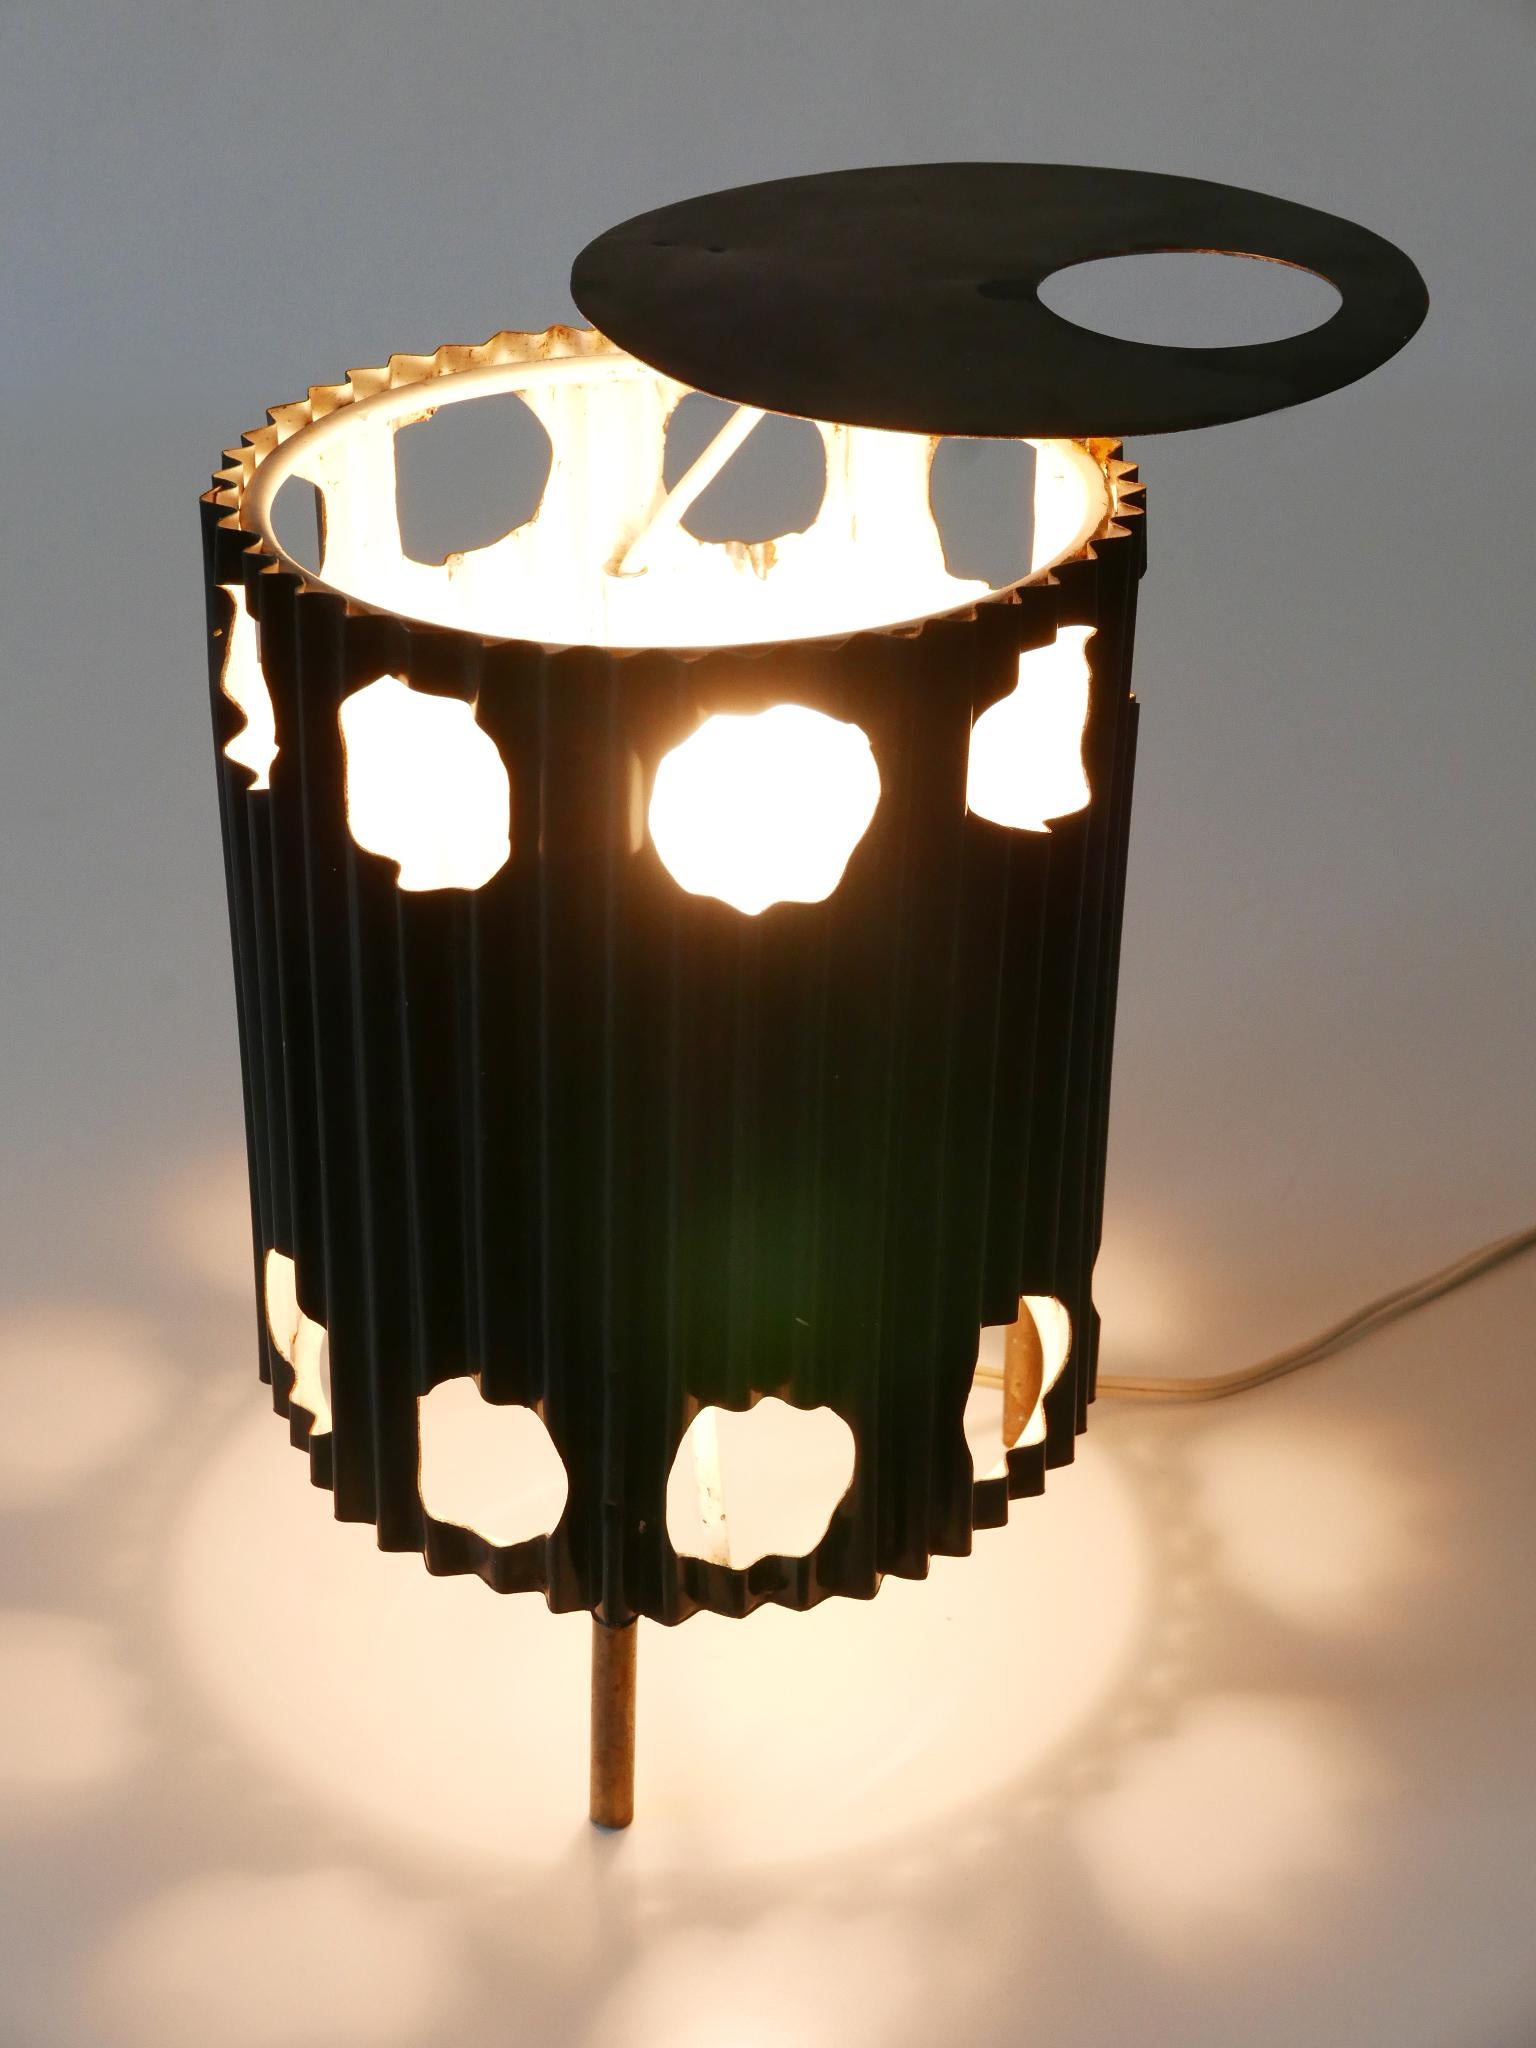 Extremely Rare Mid-Century Modern Table Lamp 'Java' by Mathieu Matégot 1950s For Sale 9